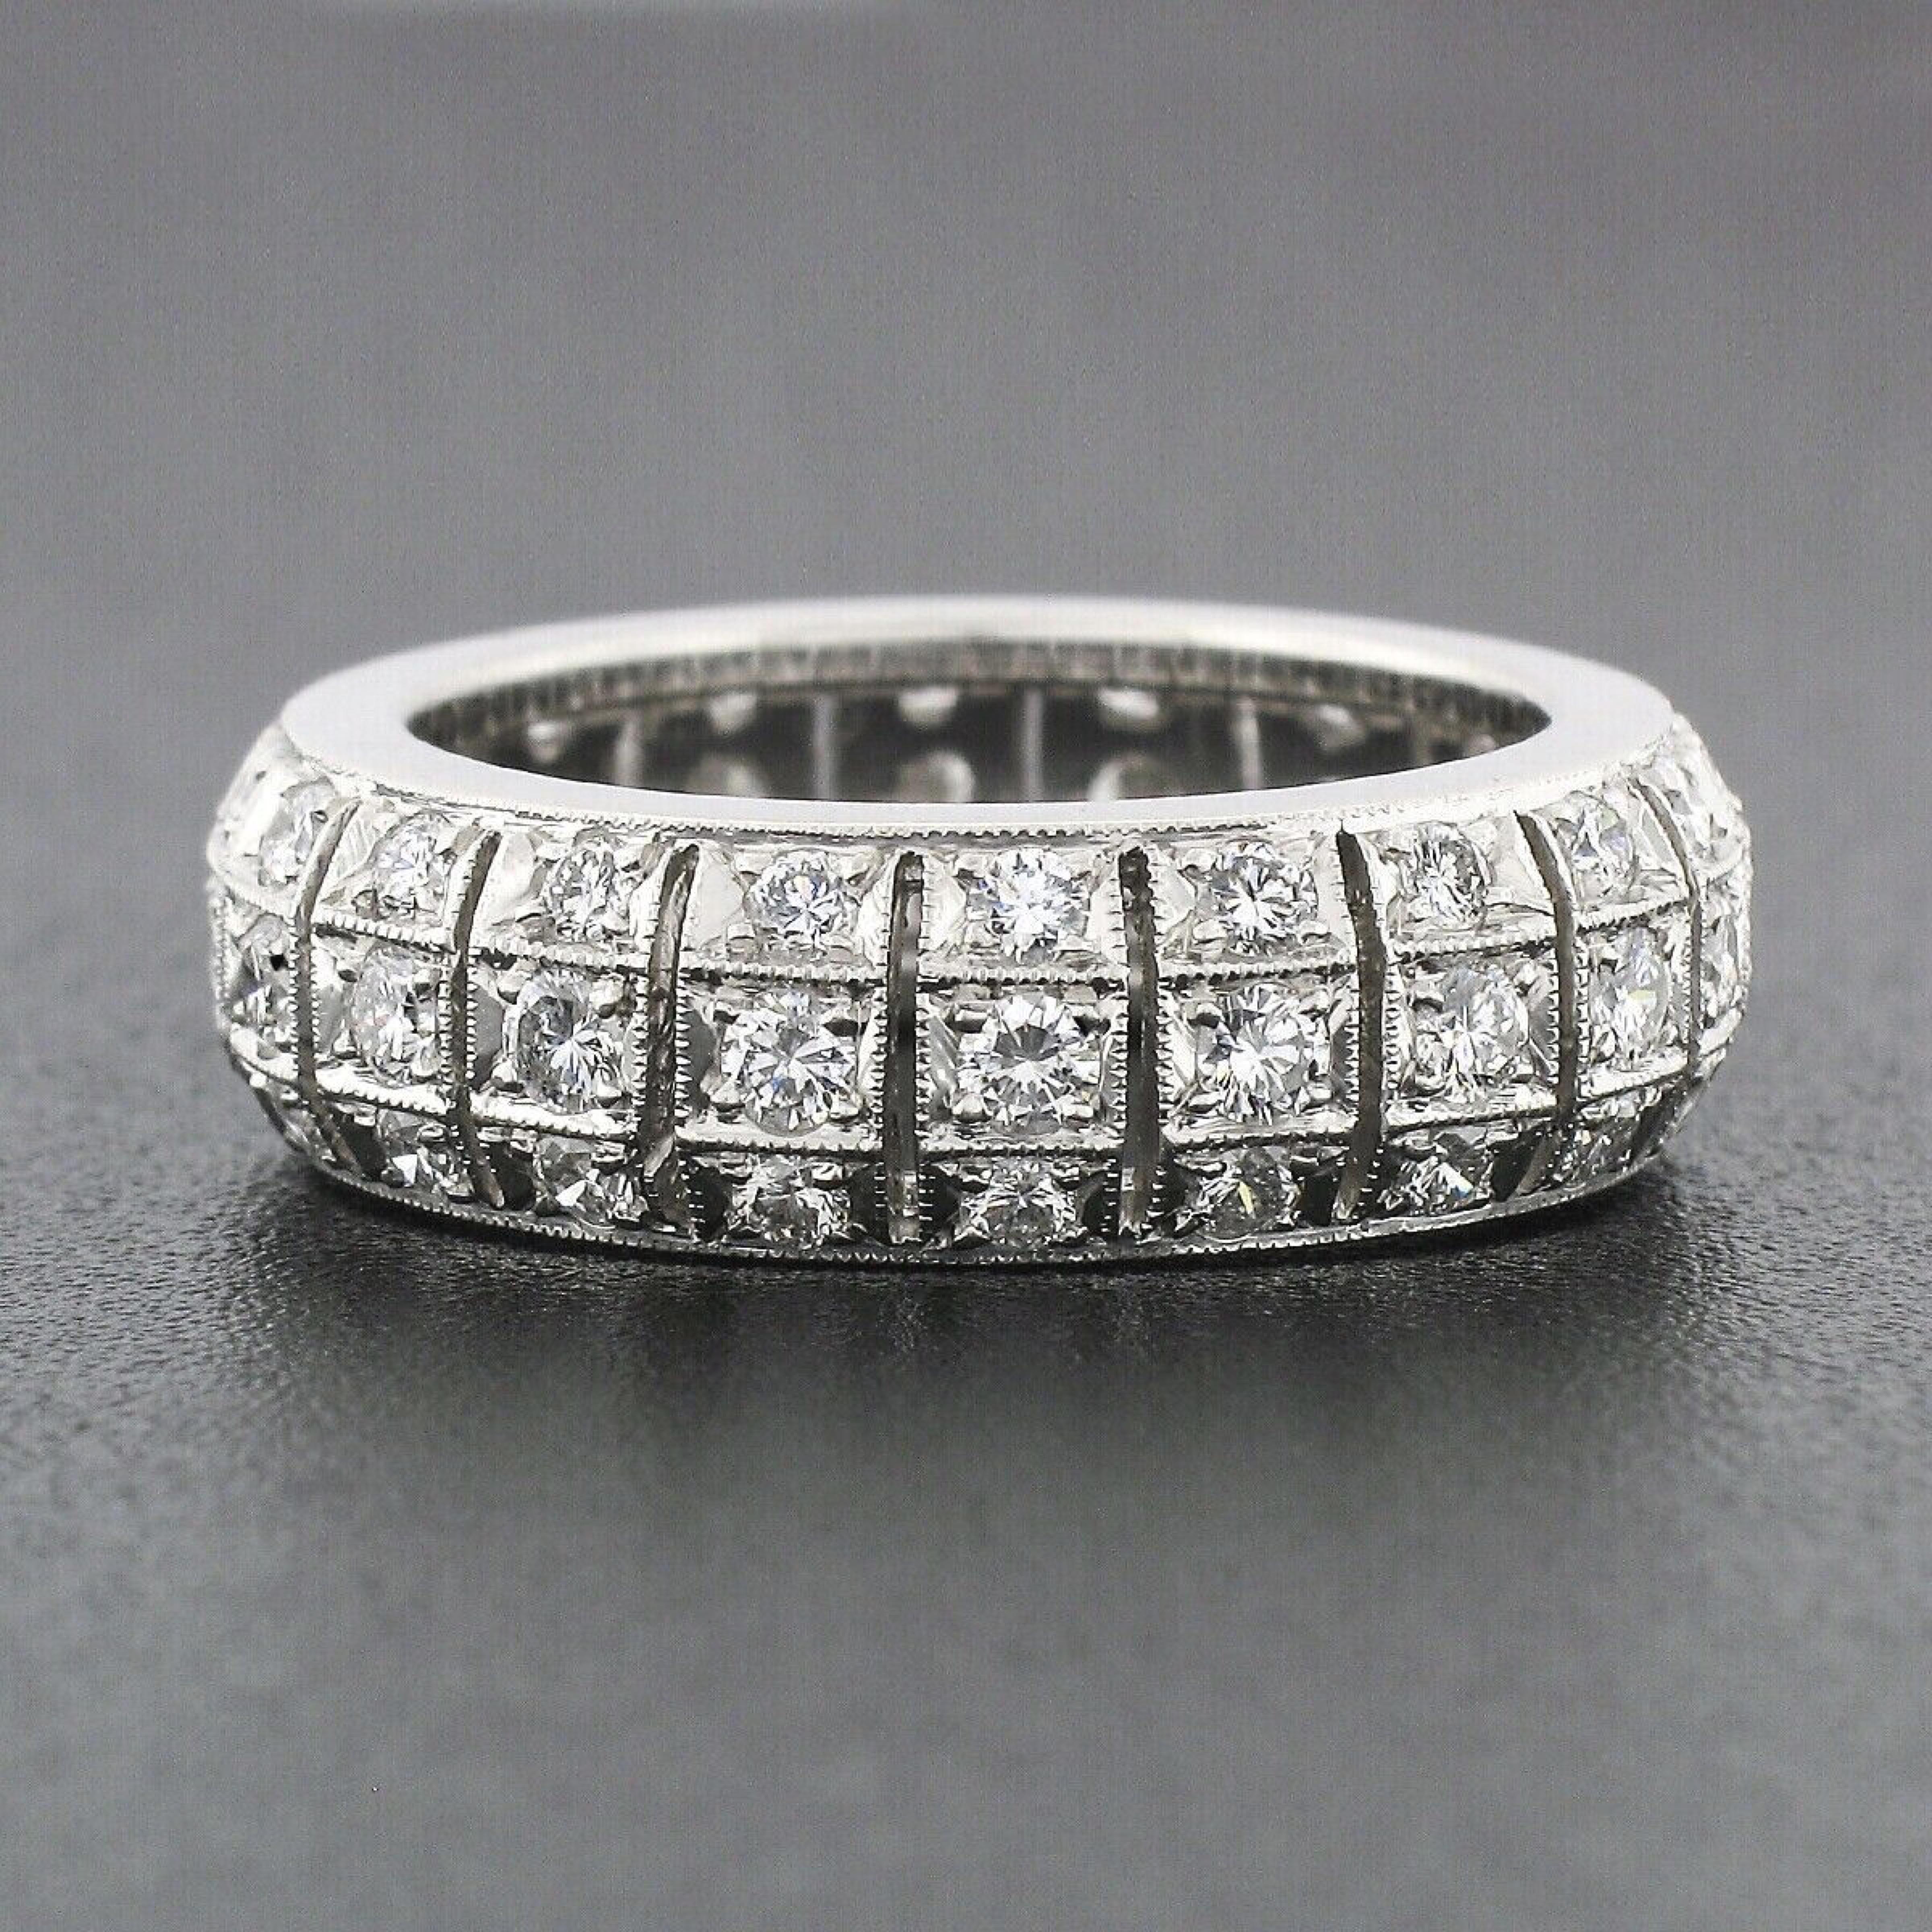 Here we have a truly spectacular vintage diamond eternity band that was crafted from solid .950 platinum. It features 60 very fine quality round brilliant cut diamonds that are perfectly pave set throughout the eternity design. The design of this